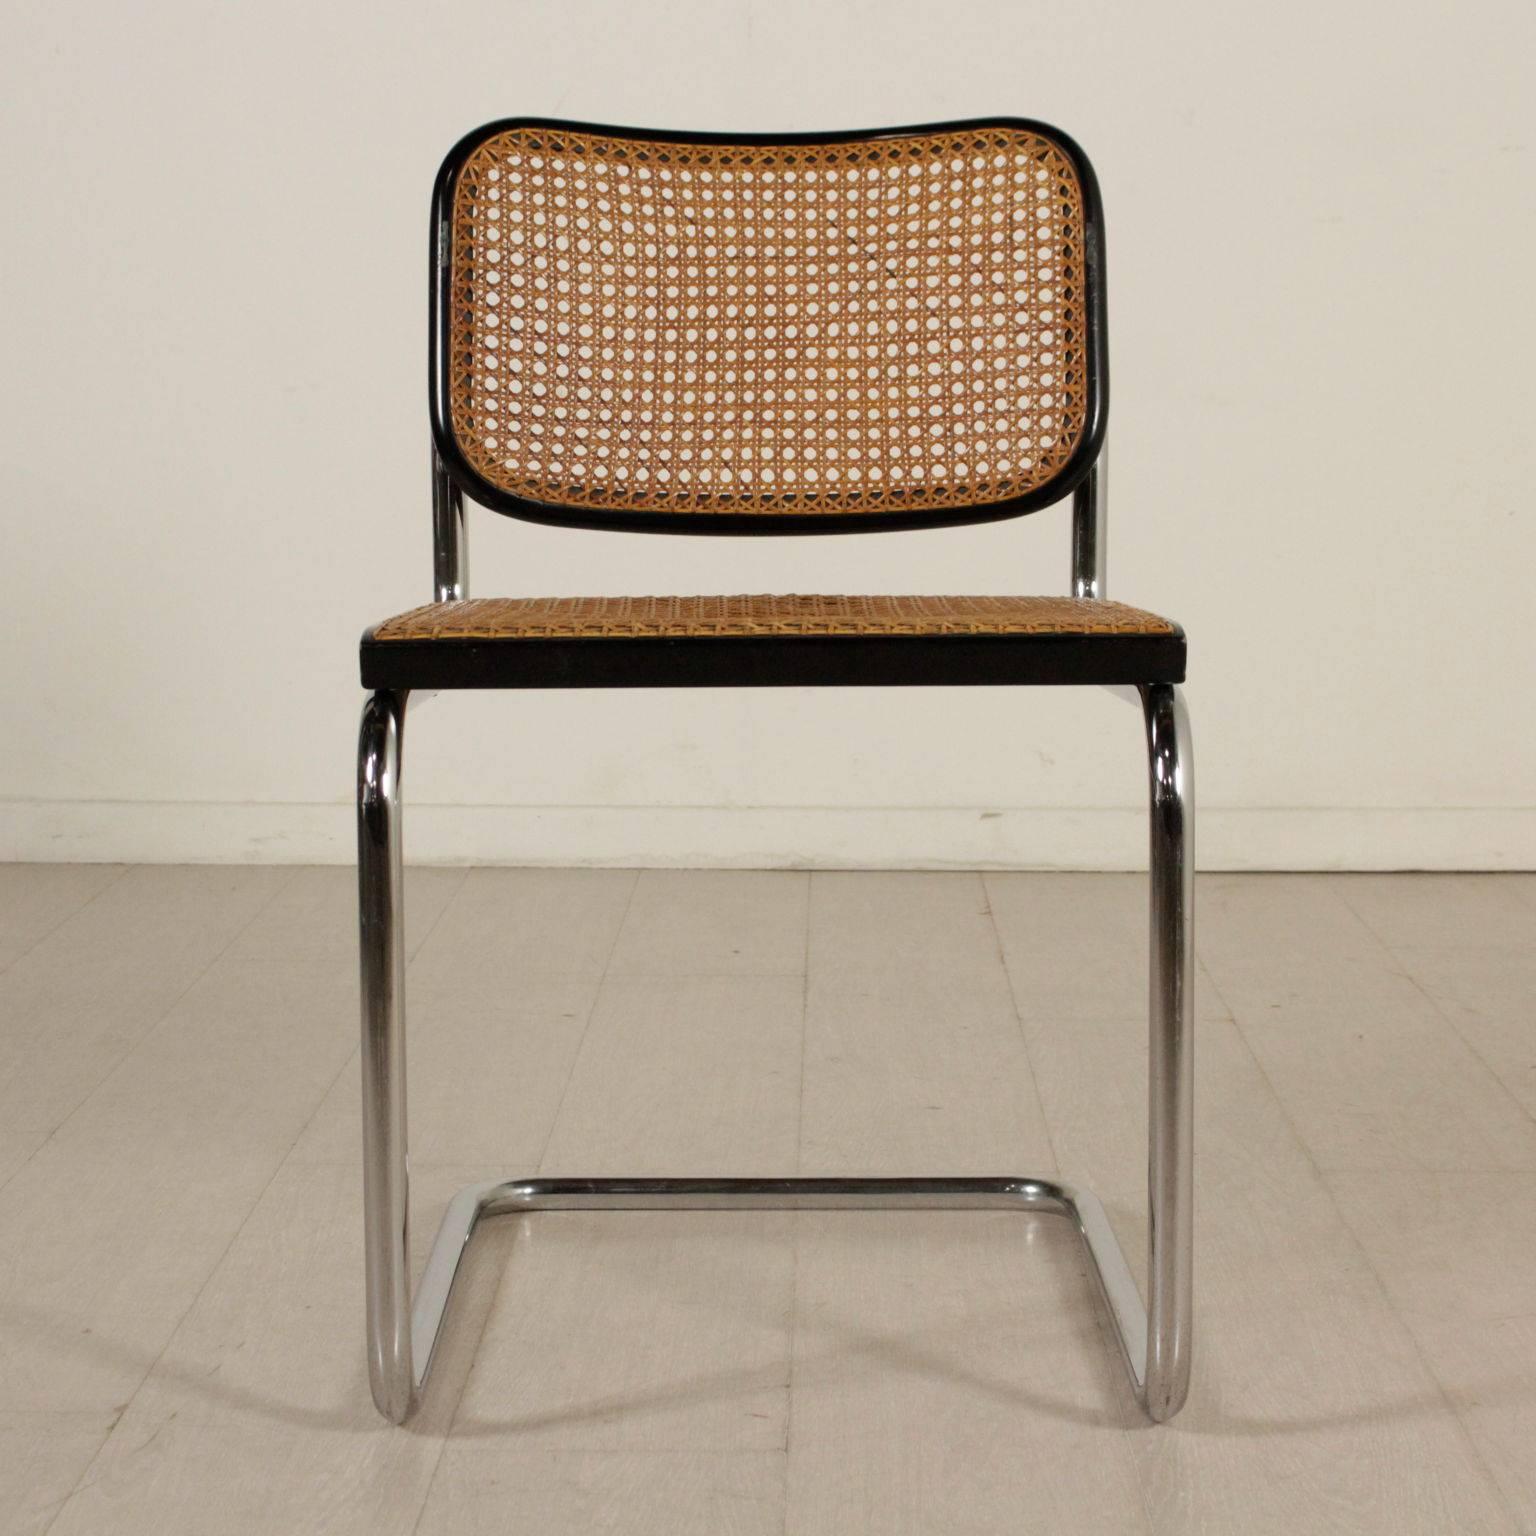 A group of four chairs designed by Marcel Breuer (1902-1981) for Gavina, chromed tubular. Model: Cesca. Structure made of lacquered wood, Vienna straw. Manufactured in San Lazzaro di Savena, Italy, 1960s-1970s.